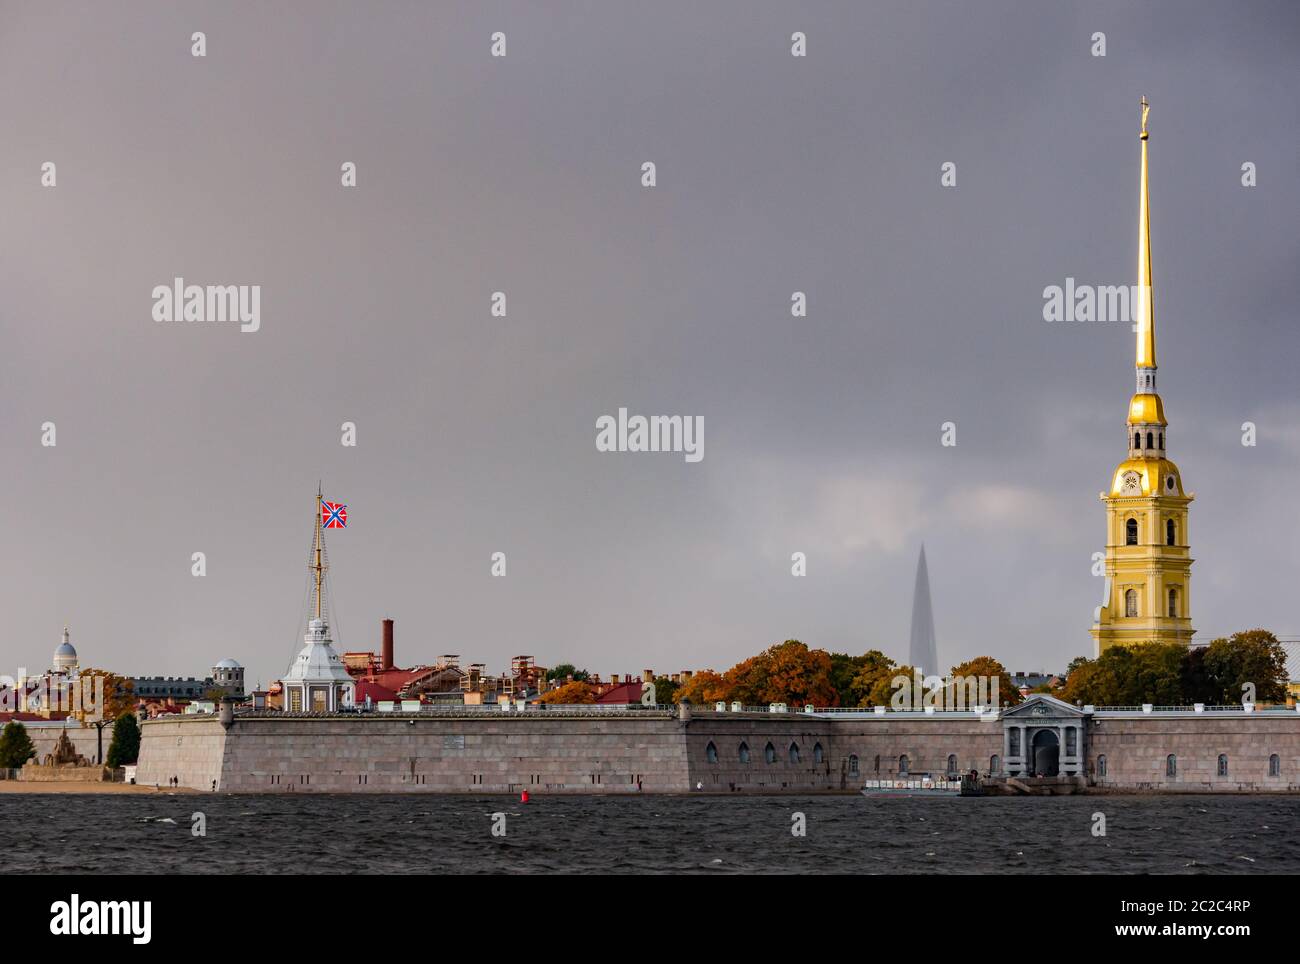 Peter and Paul Cathedral spire, Peter and Paul Fortress on Neva River with stormy sky, St Petersburg, Russia Stock Photo